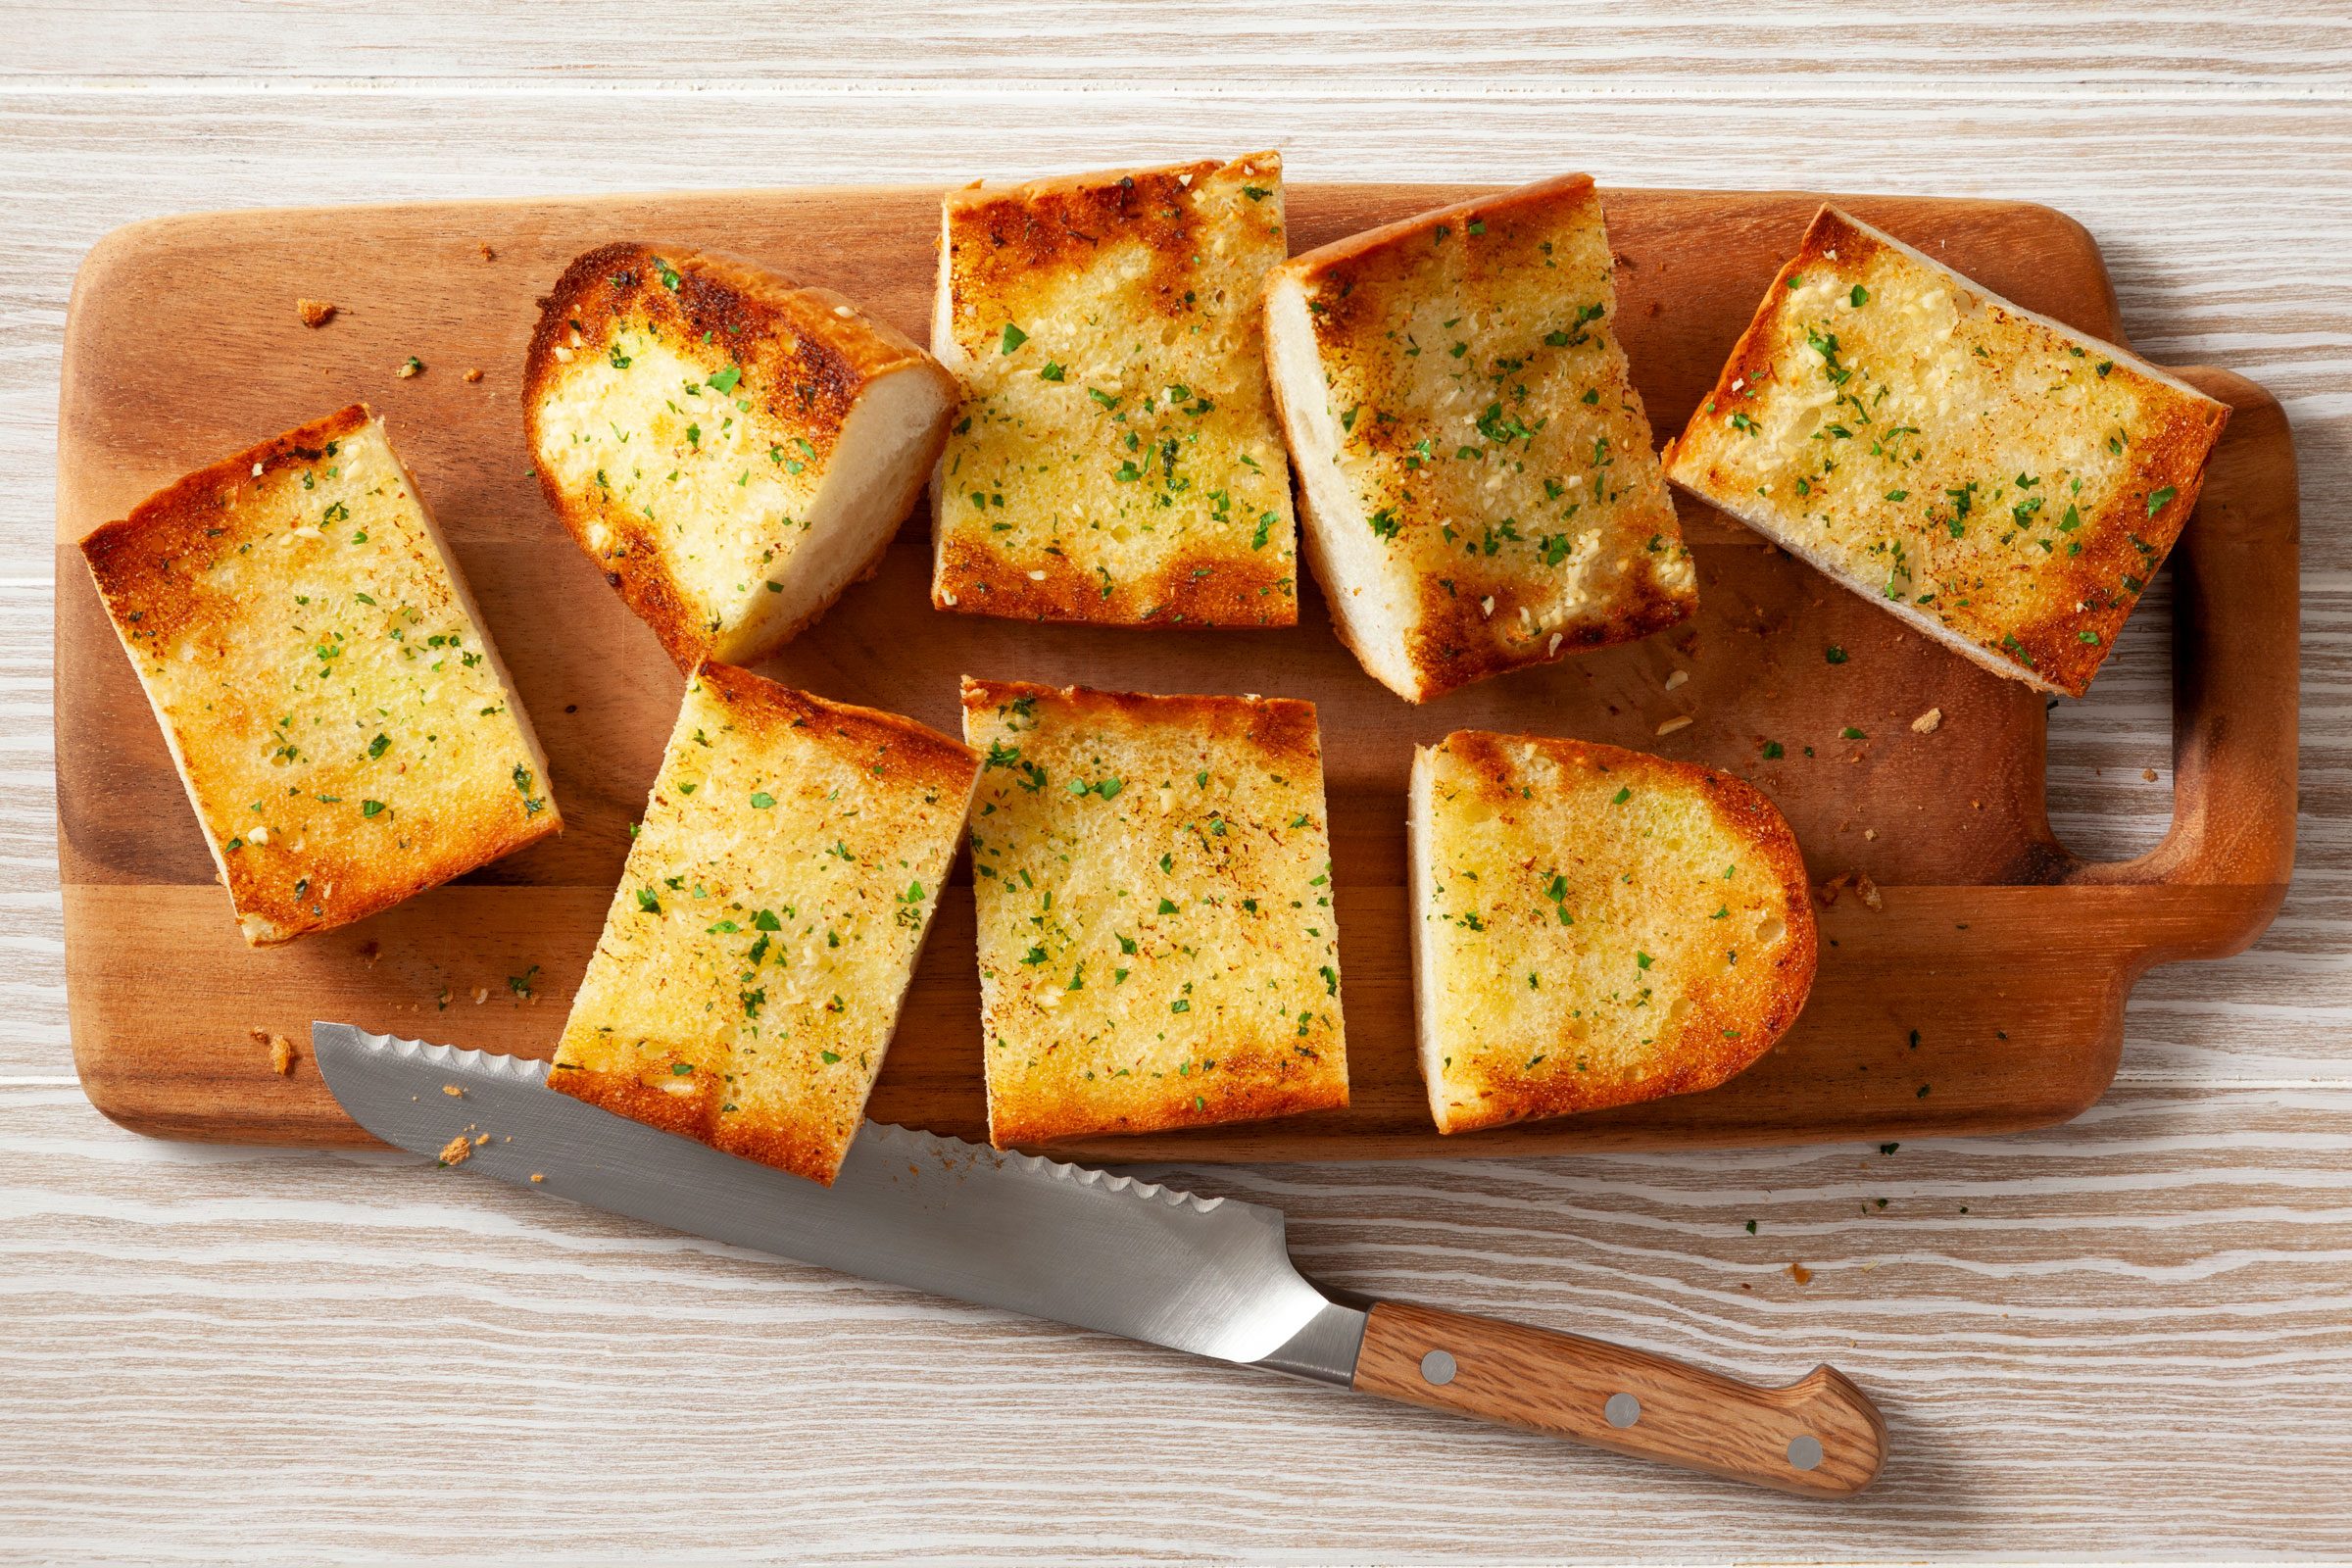 garlic bread on a wooden cutting board and cut into slices